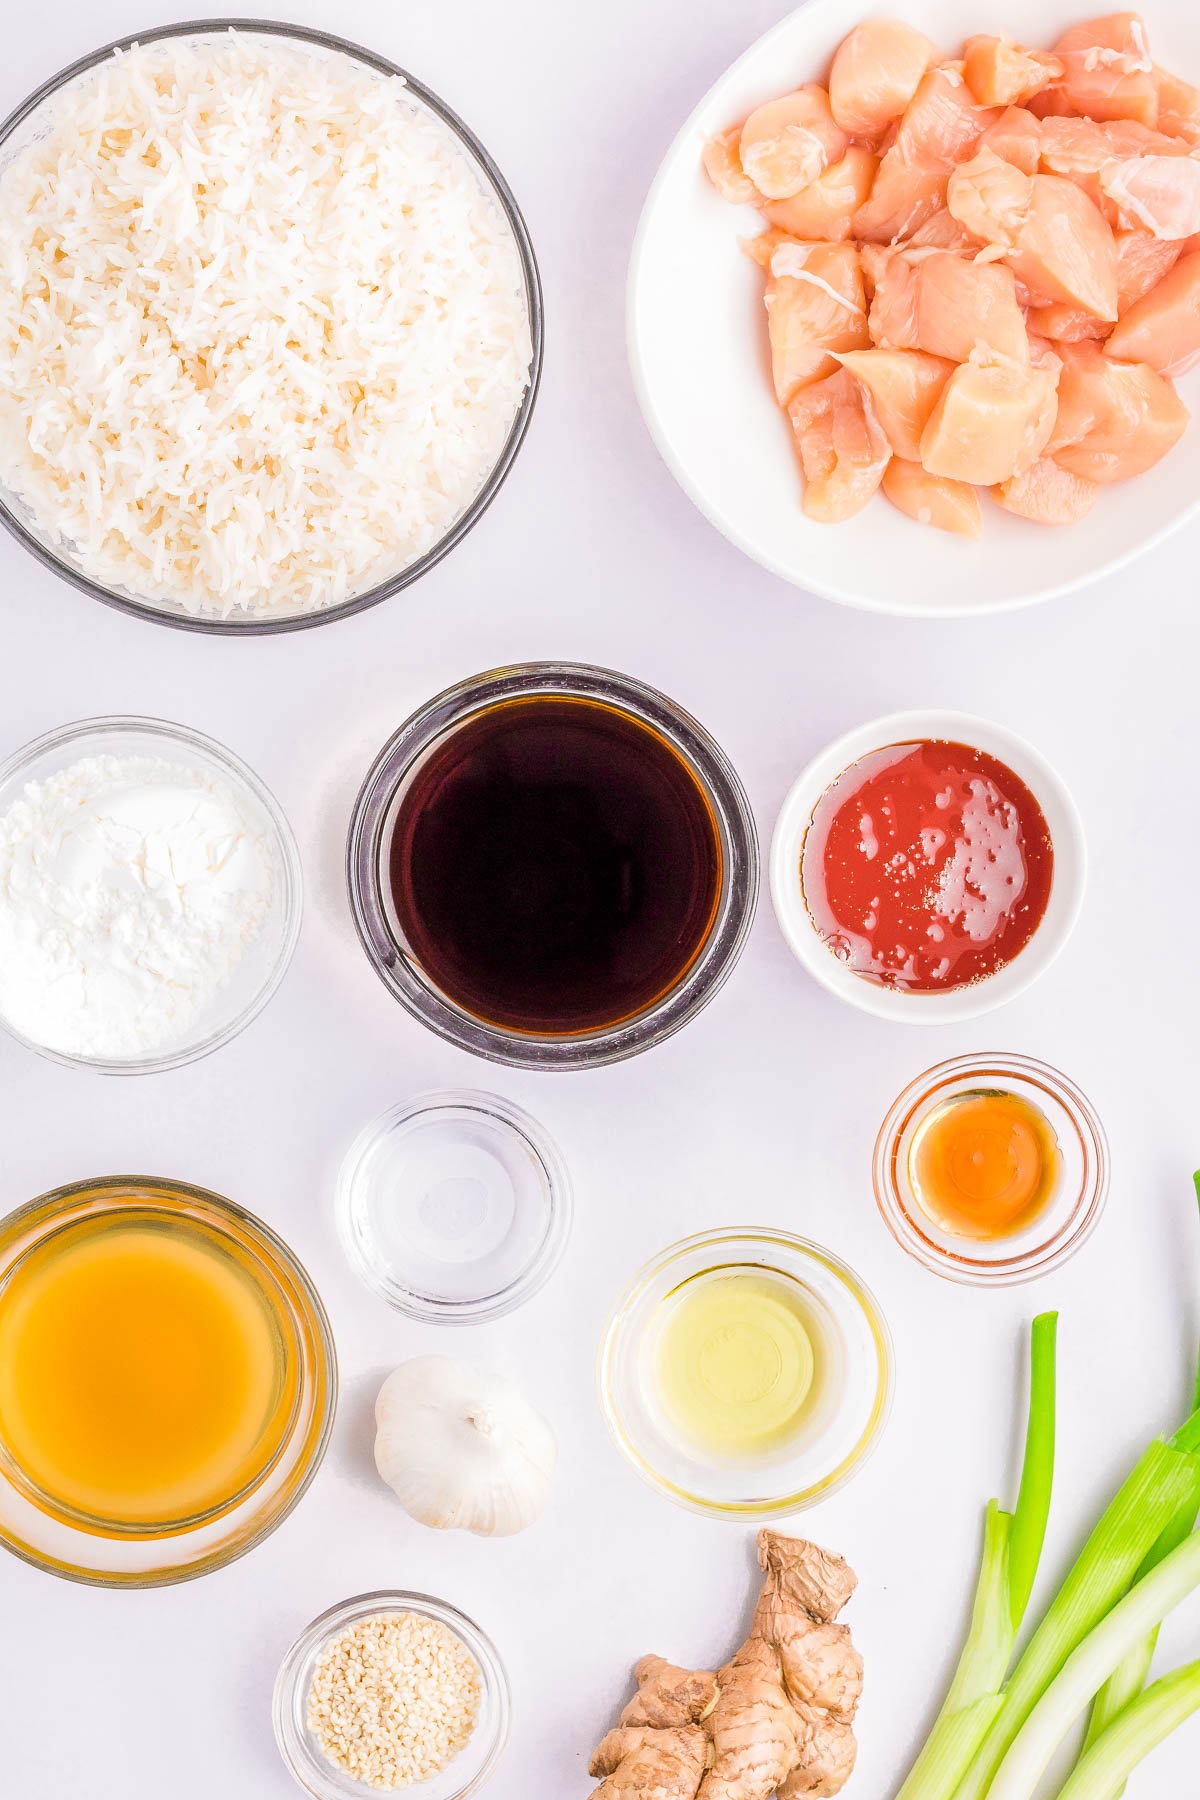 Various cooking ingredients are arranged on a white surface, including rice, raw chicken, soy sauce, tomato paste, egg yolk, oil, broth, ginger, garlic, green onions, water, and sesame seeds.